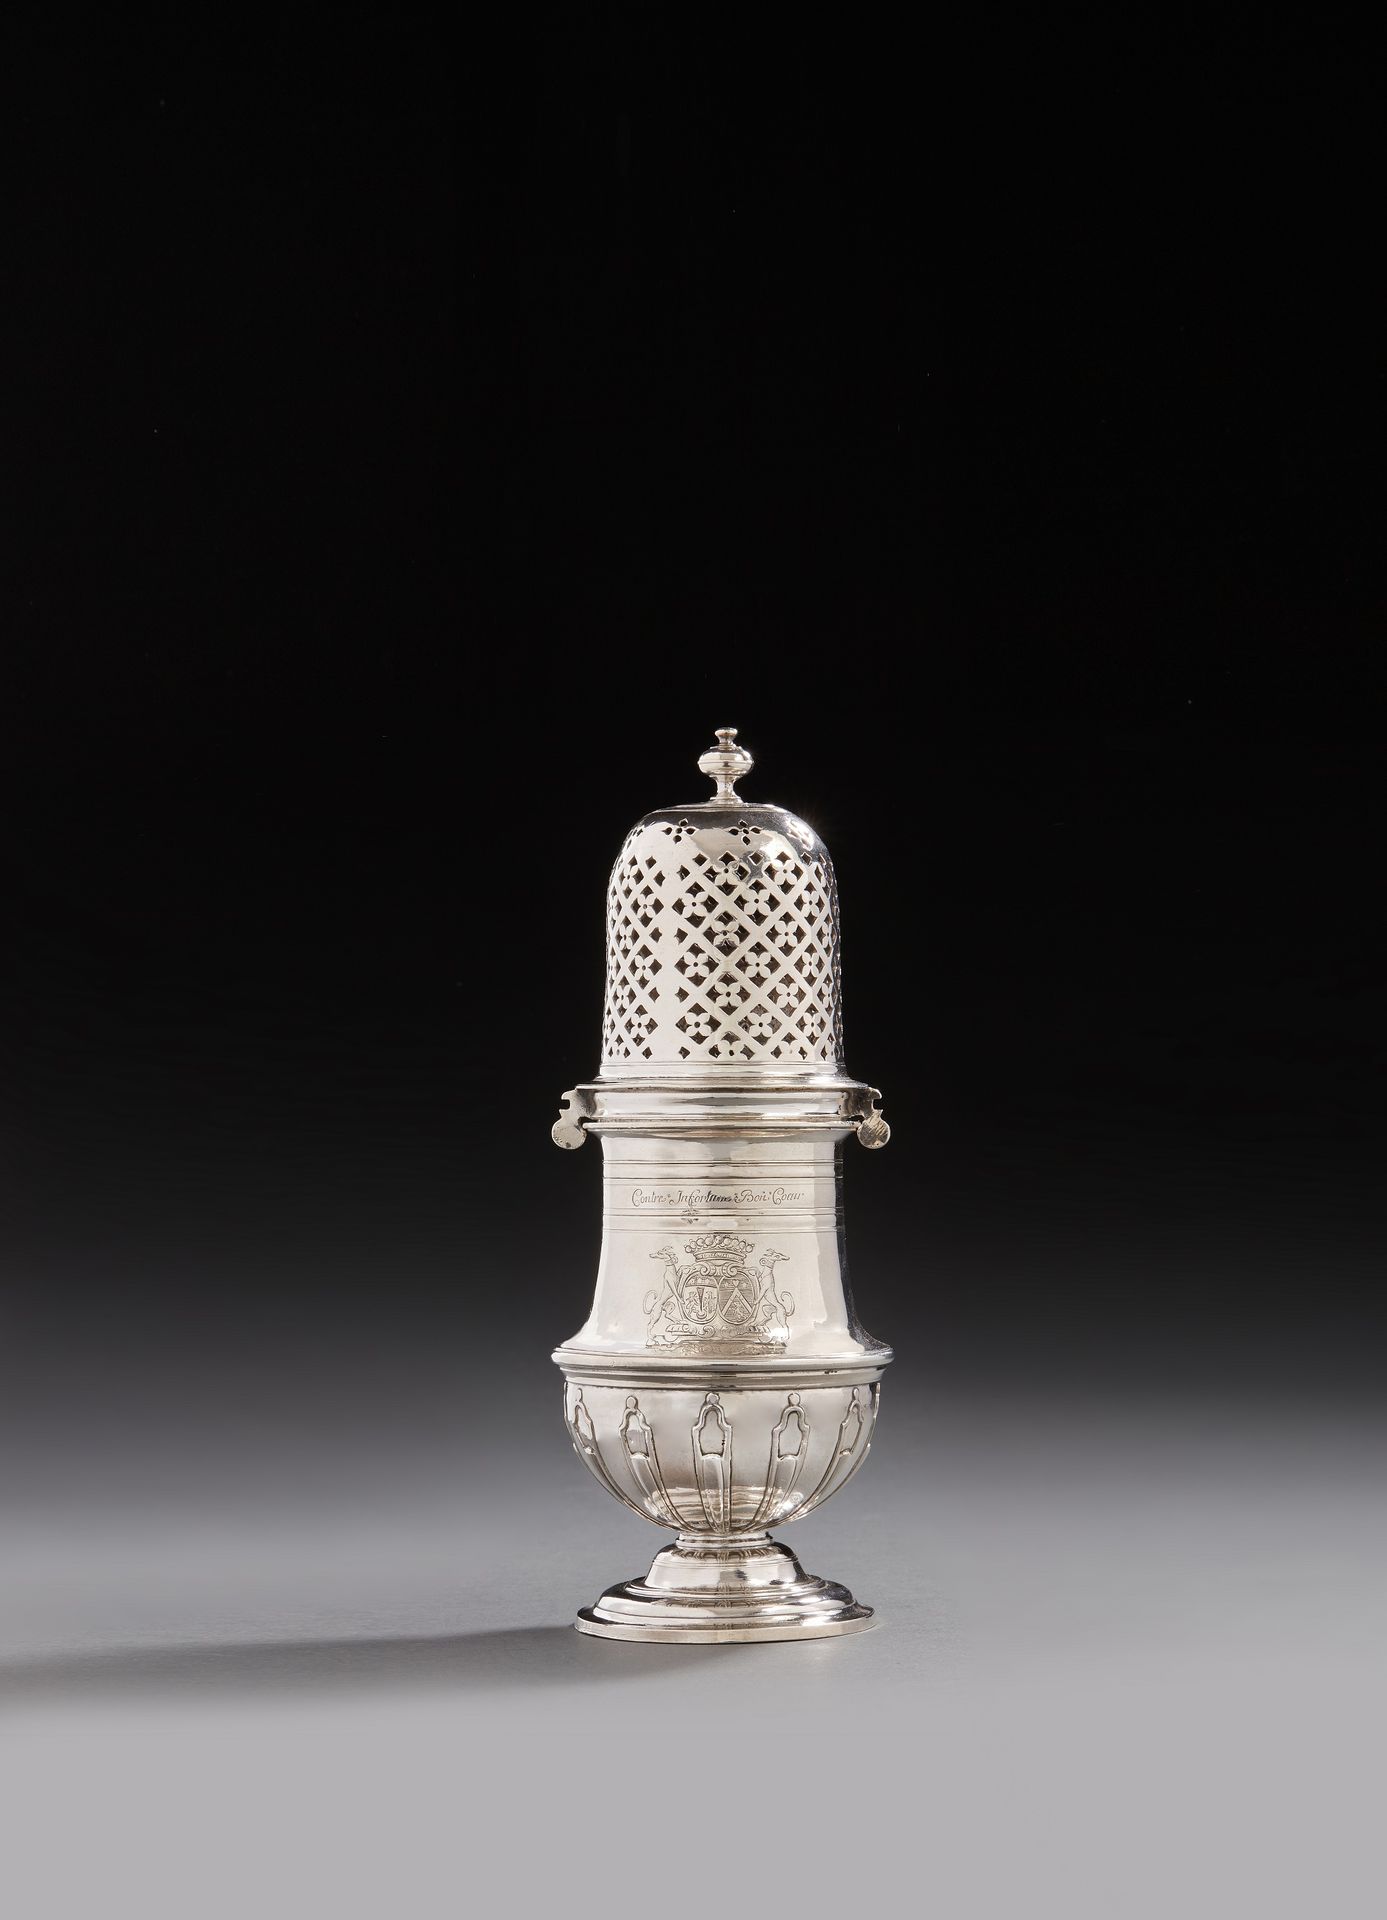 Null PARIS 1724 - 1725
A silver saupoudroir mounted with a bayonet in a baluster&hellip;